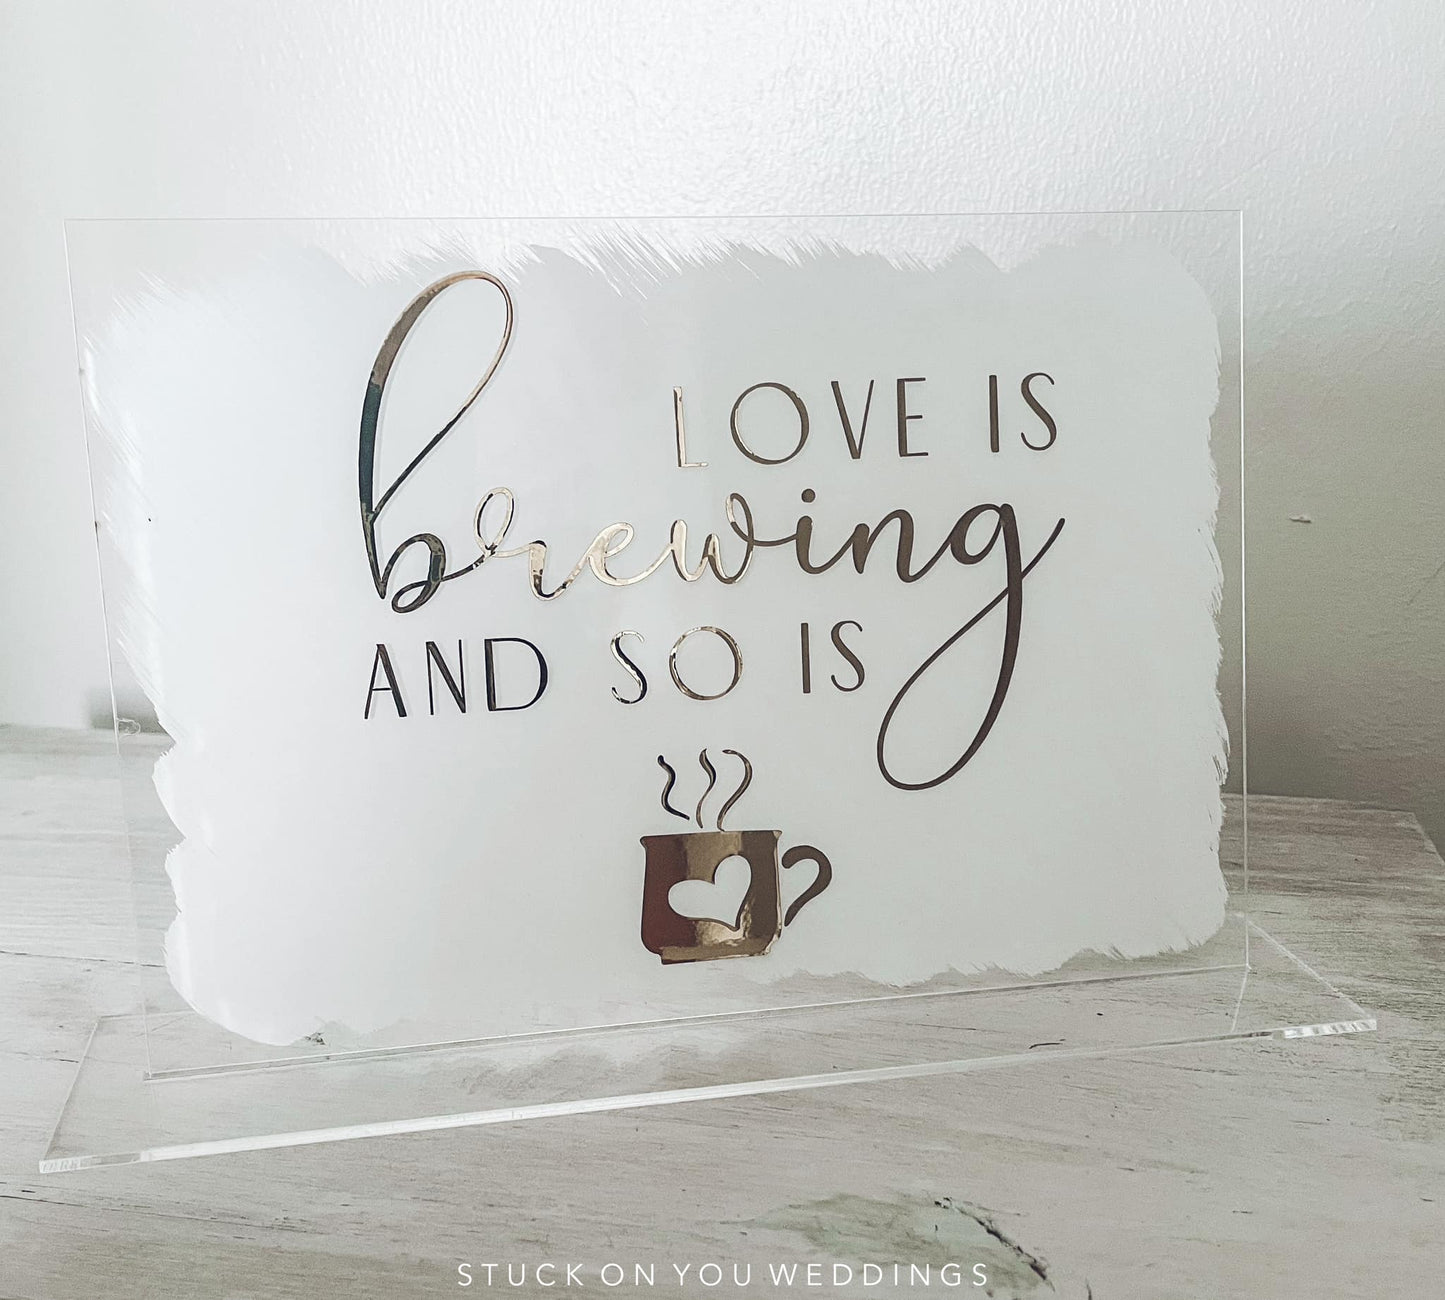 Love Is Brewing & So is Coffee - A5 Acrylic Table Talker